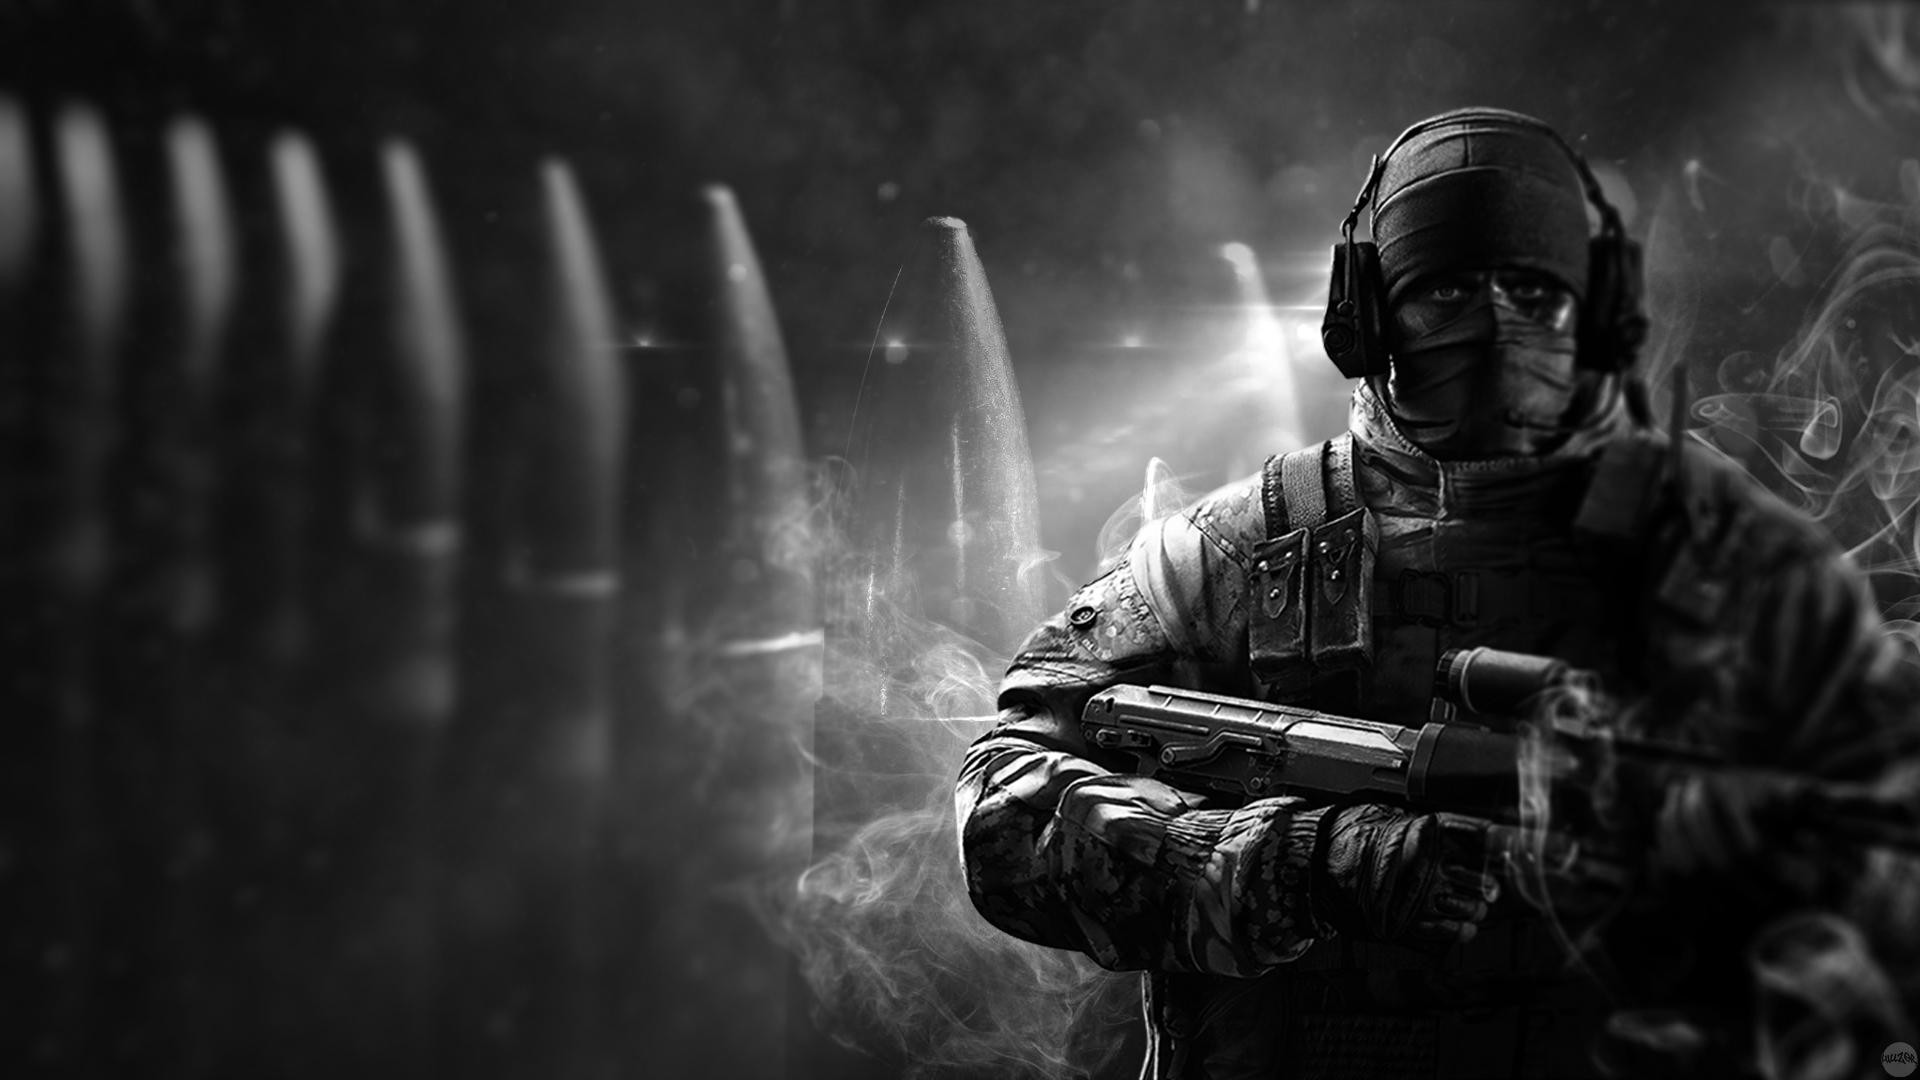 rainbow six siege wallpaper,action adventure game,soldier,personal protective equipment,shooter game,games